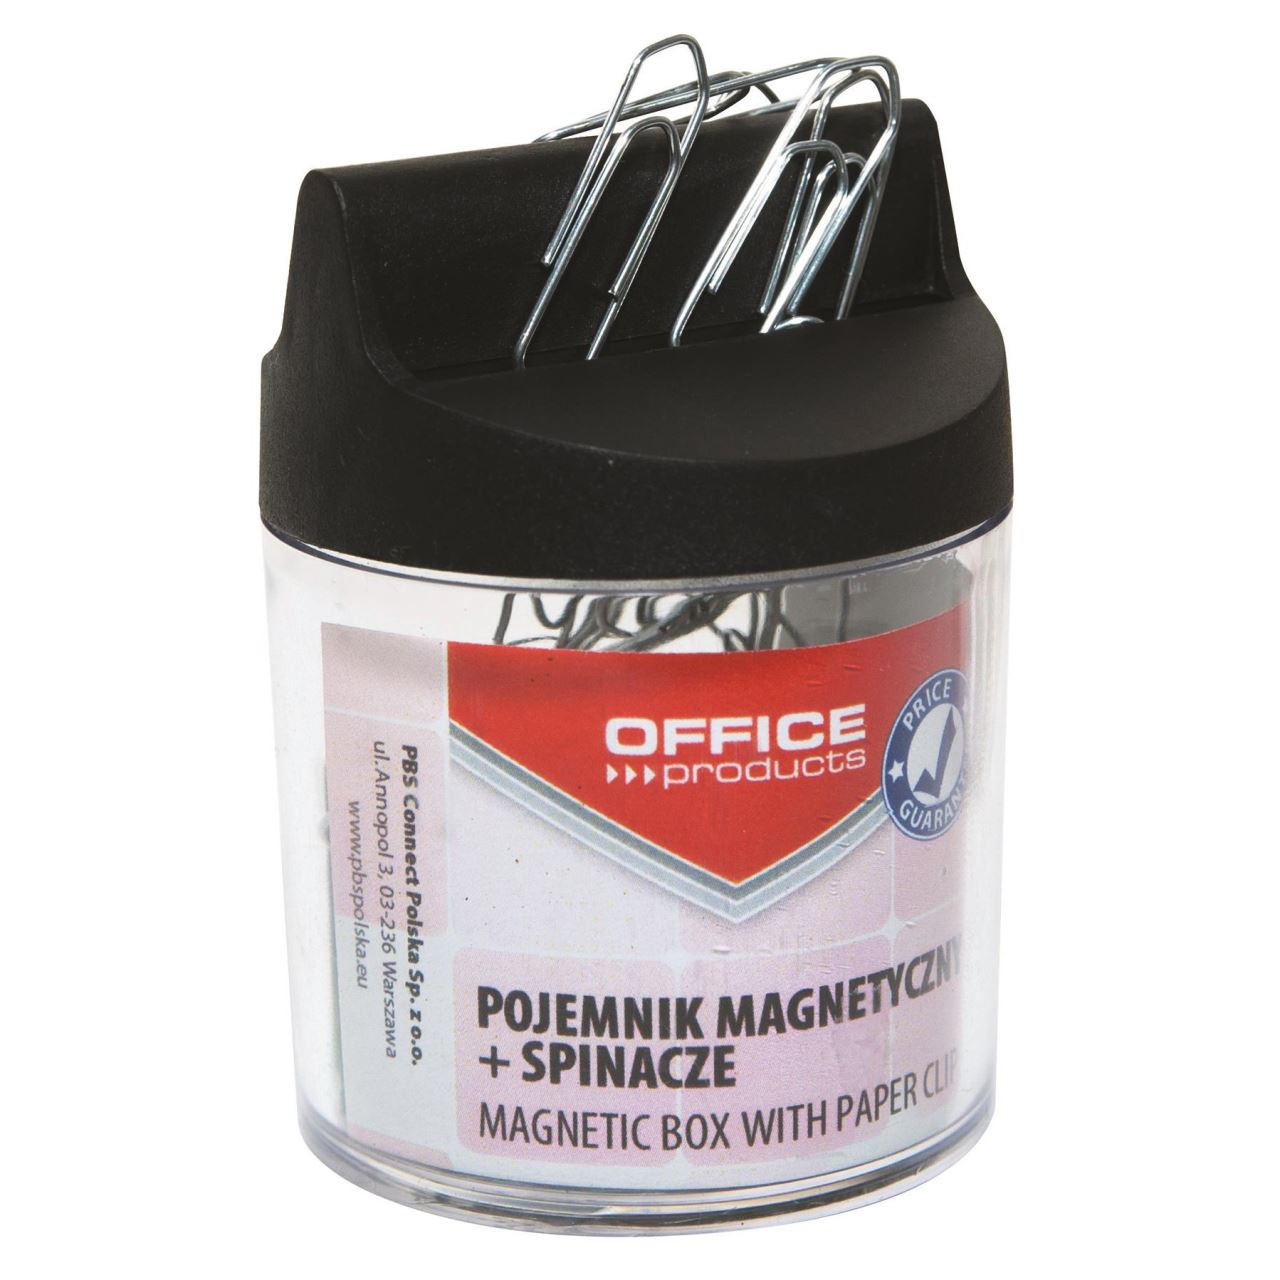 Suport magnetic pentru agrafe, rotund, transparent, OFFICE Products